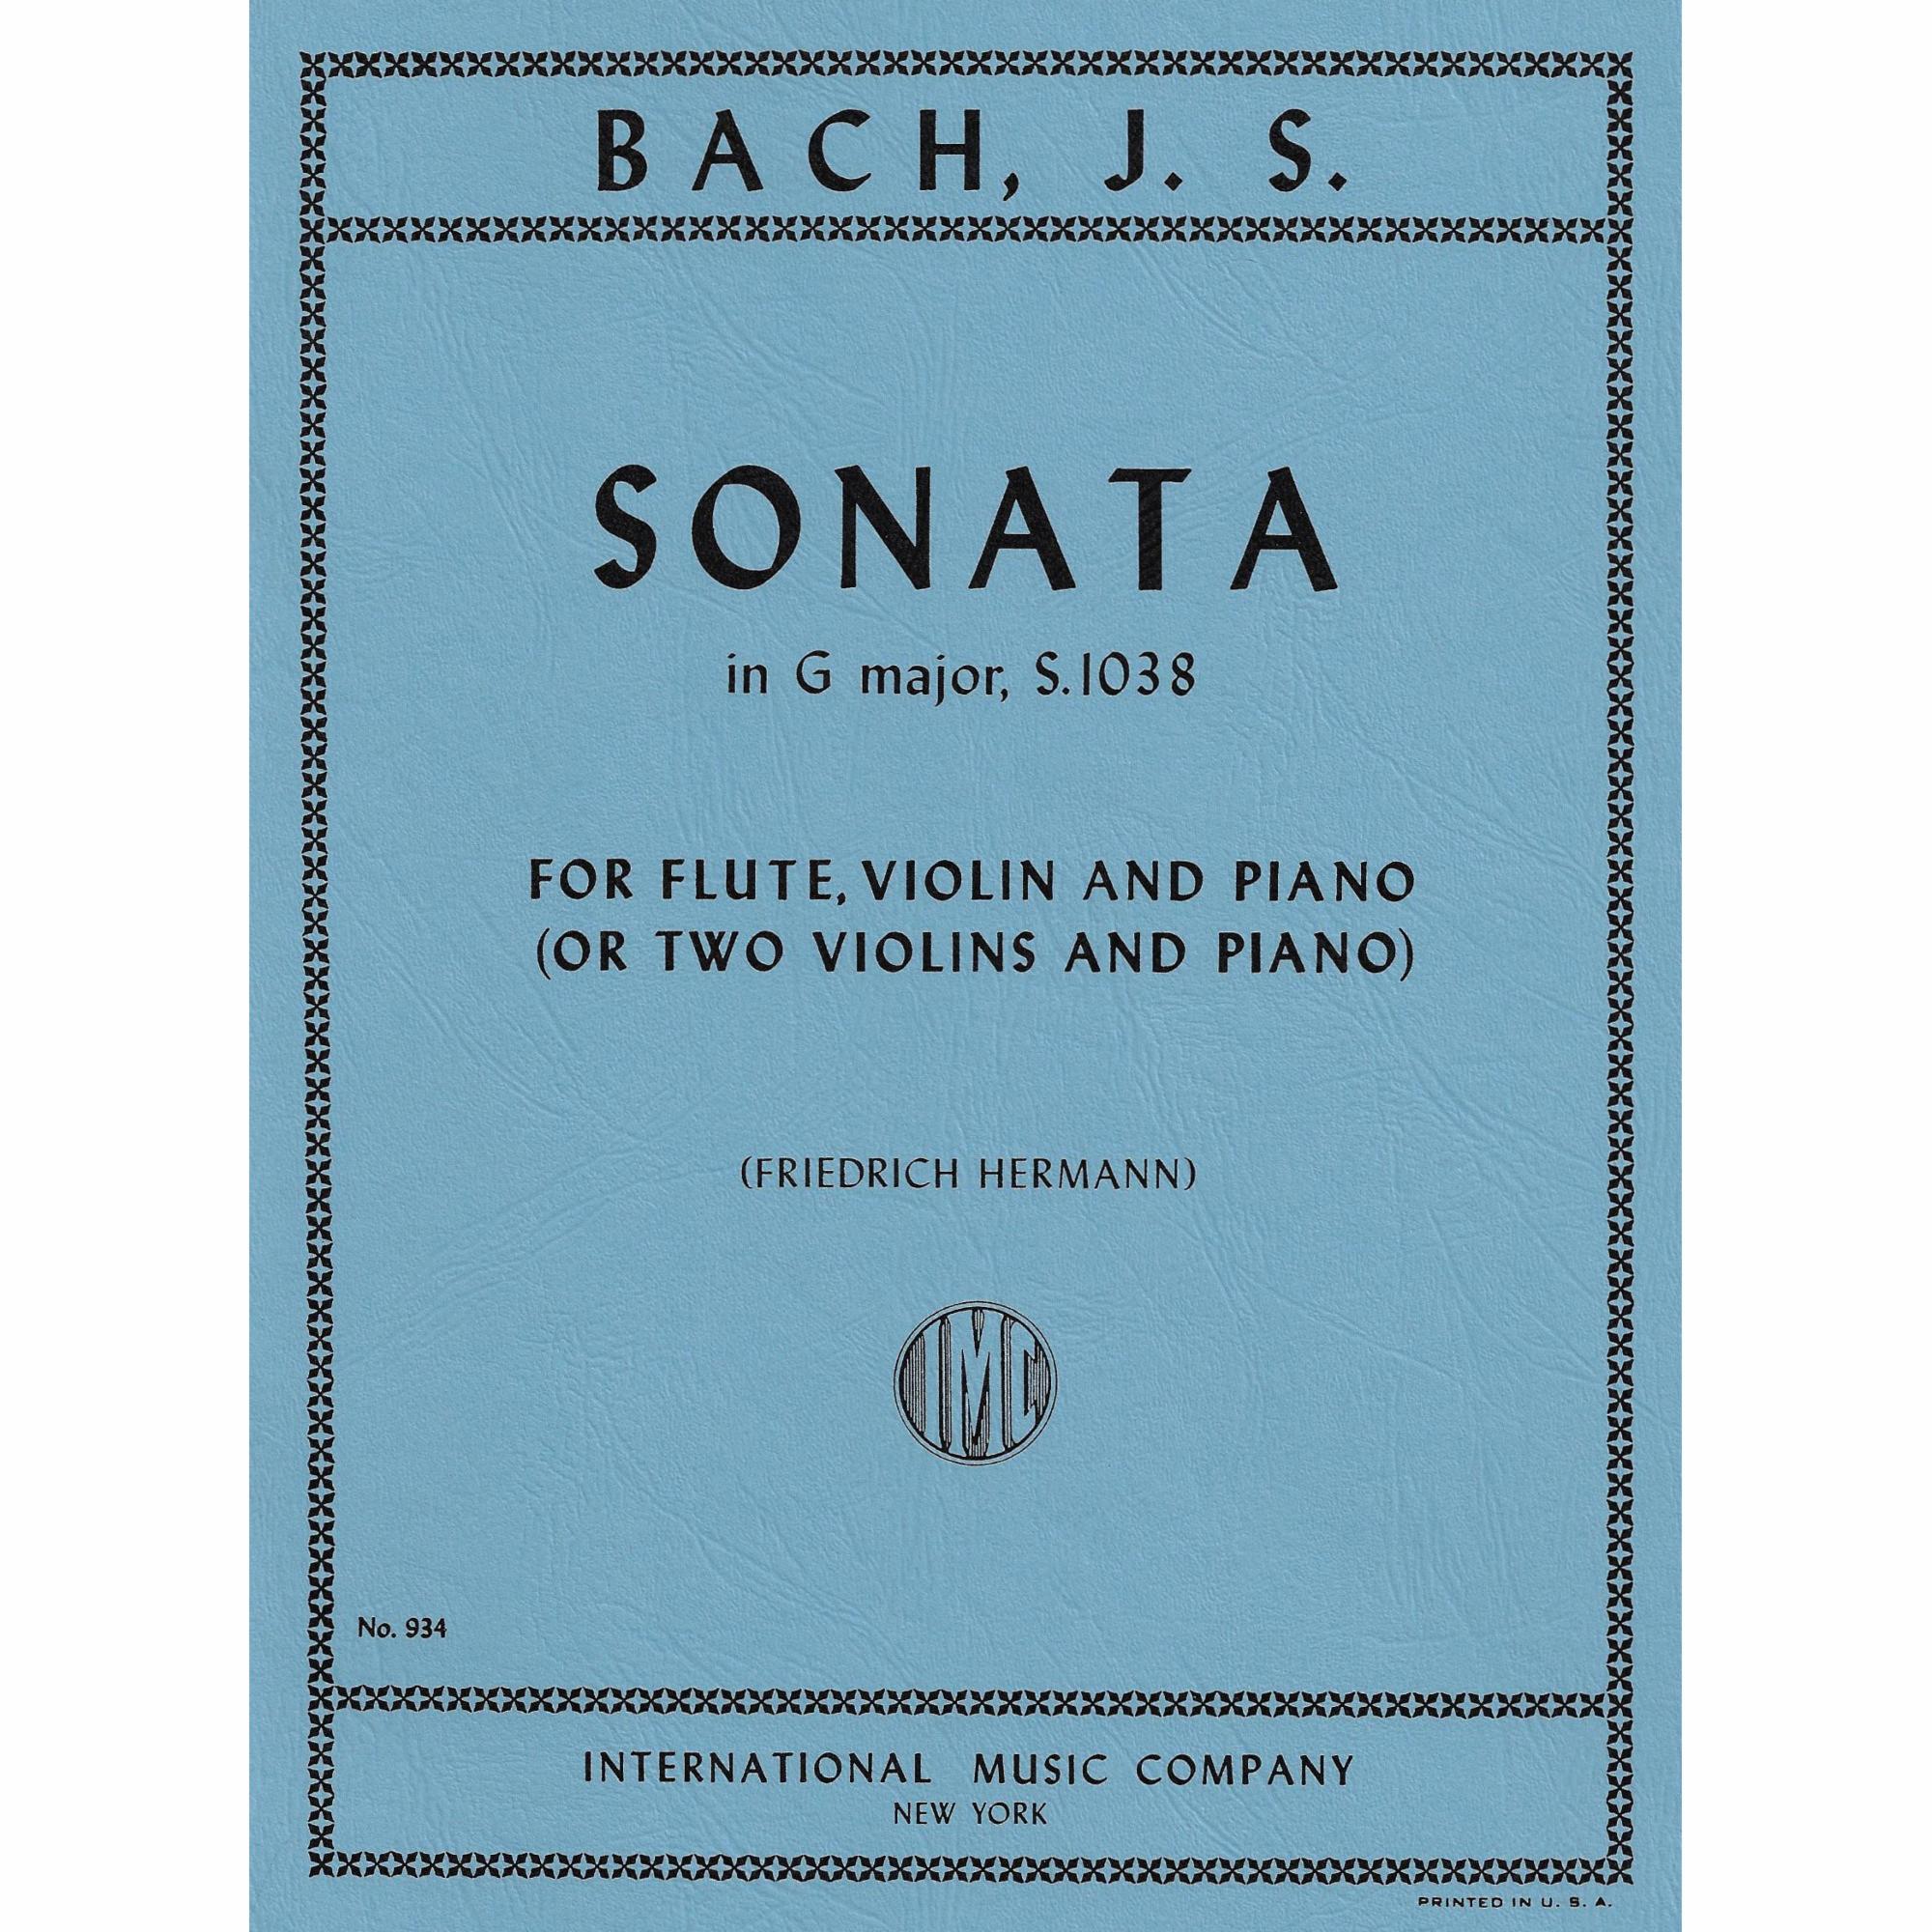 Bach -- Sonata in G Major, S. 1038 for Two Violins and Piano